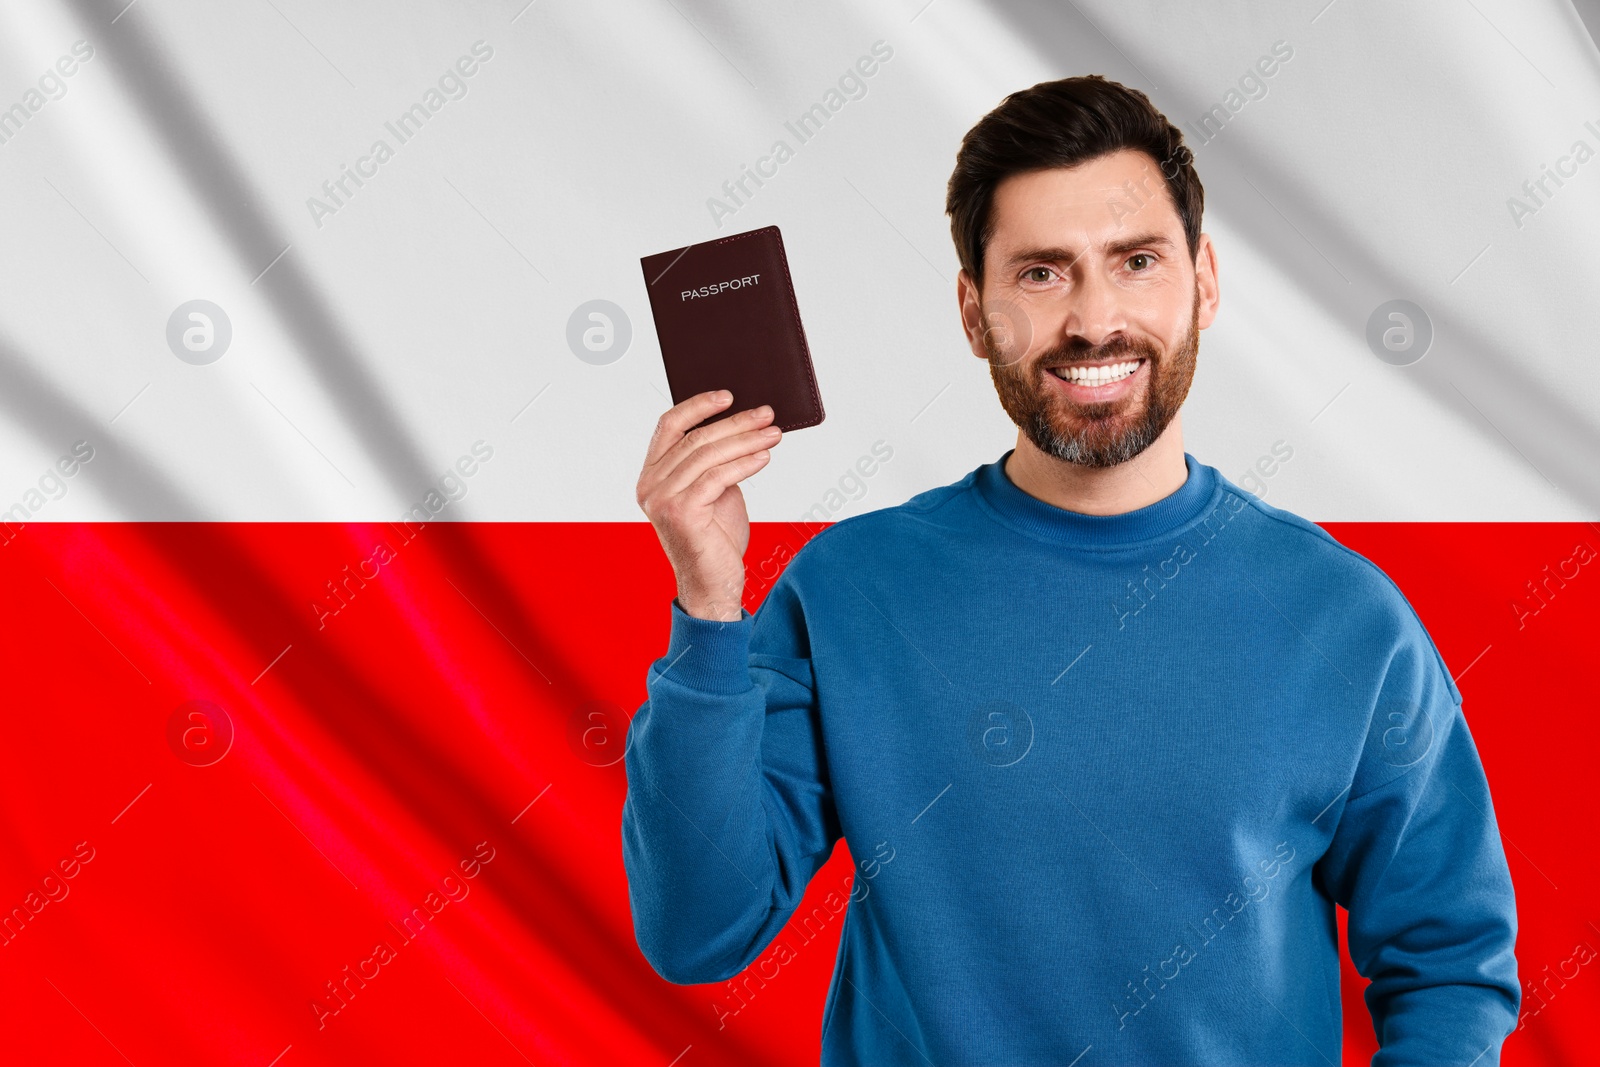 Image of Immigration. Happy man with passport against national flag of Poland, space for text